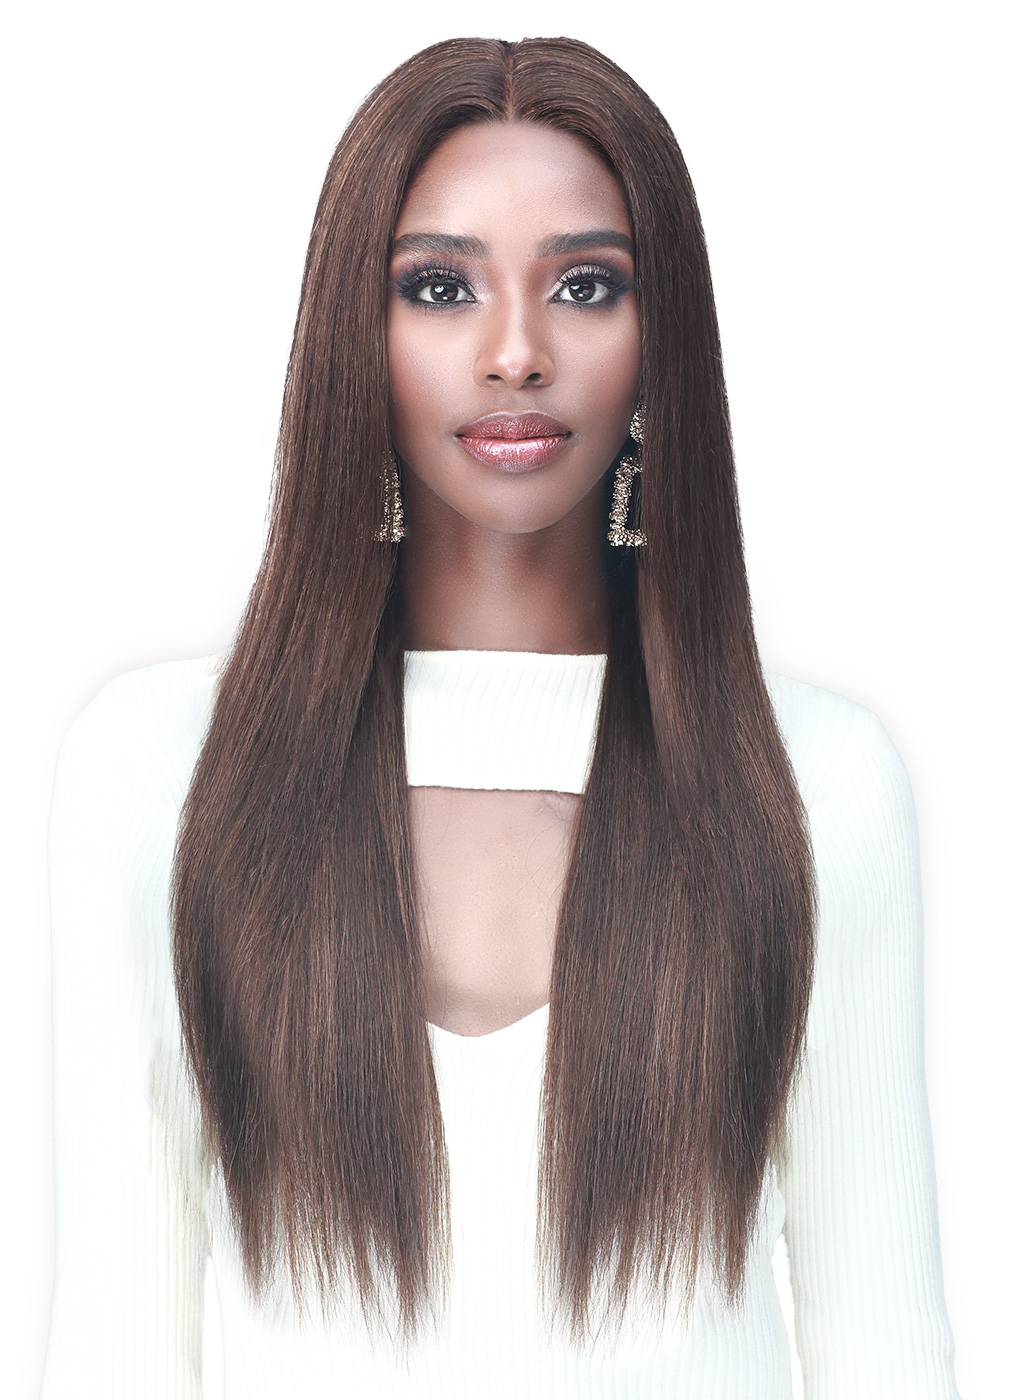 MHLF911 NATURAL PERM STRAIGHT 26